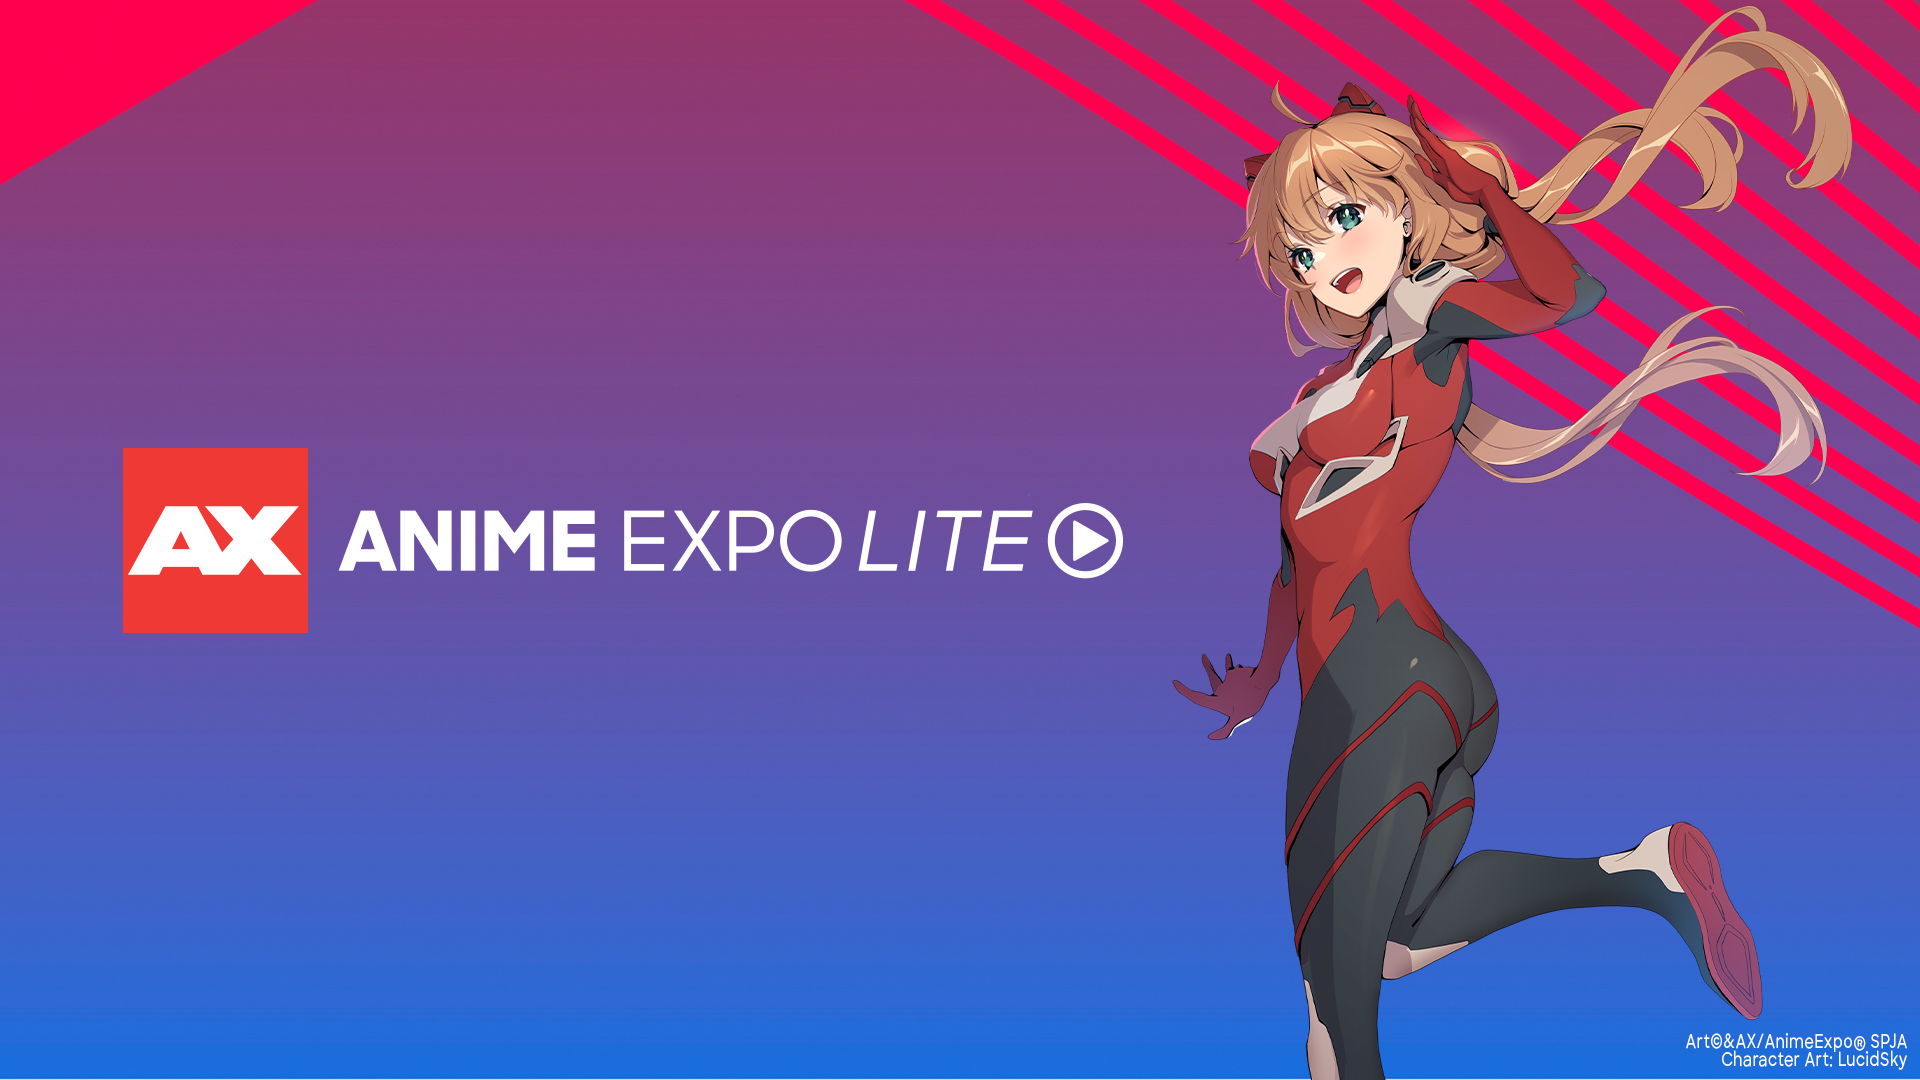 Thank you for joining us at AX 2019! ✨ - Anime Expo Email Archive